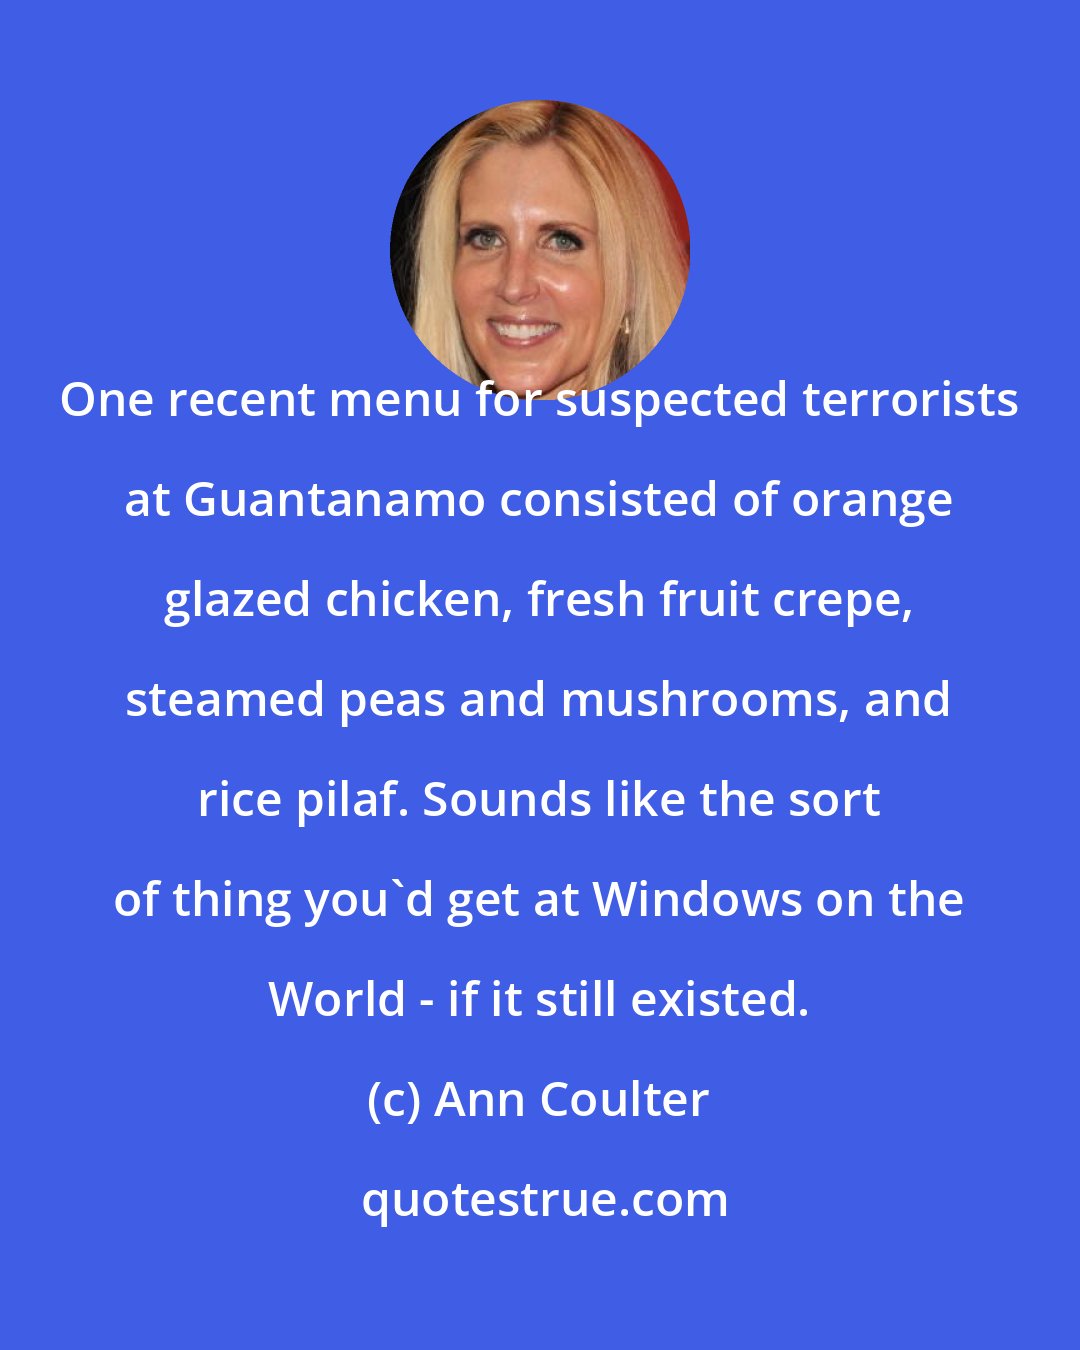 Ann Coulter: One recent menu for suspected terrorists at Guantanamo consisted of orange glazed chicken, fresh fruit crepe, steamed peas and mushrooms, and rice pilaf. Sounds like the sort of thing you'd get at Windows on the World - if it still existed.